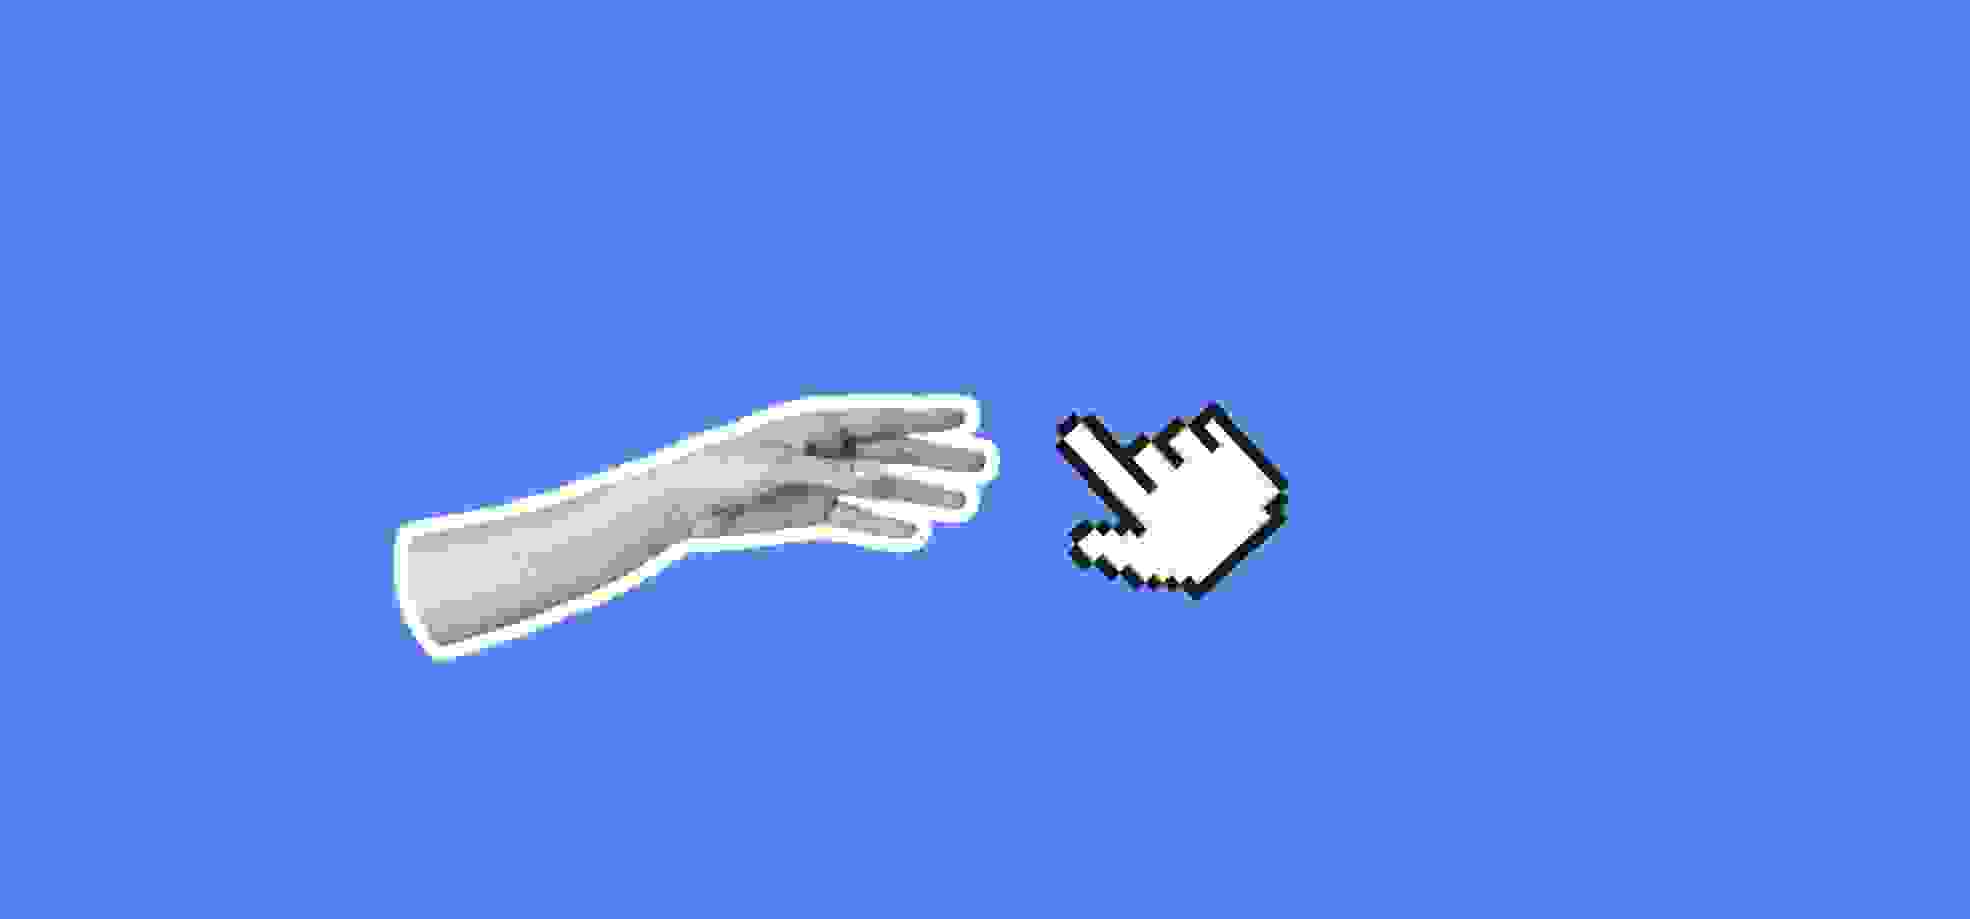 hand tends to the cursor hand on the blue background